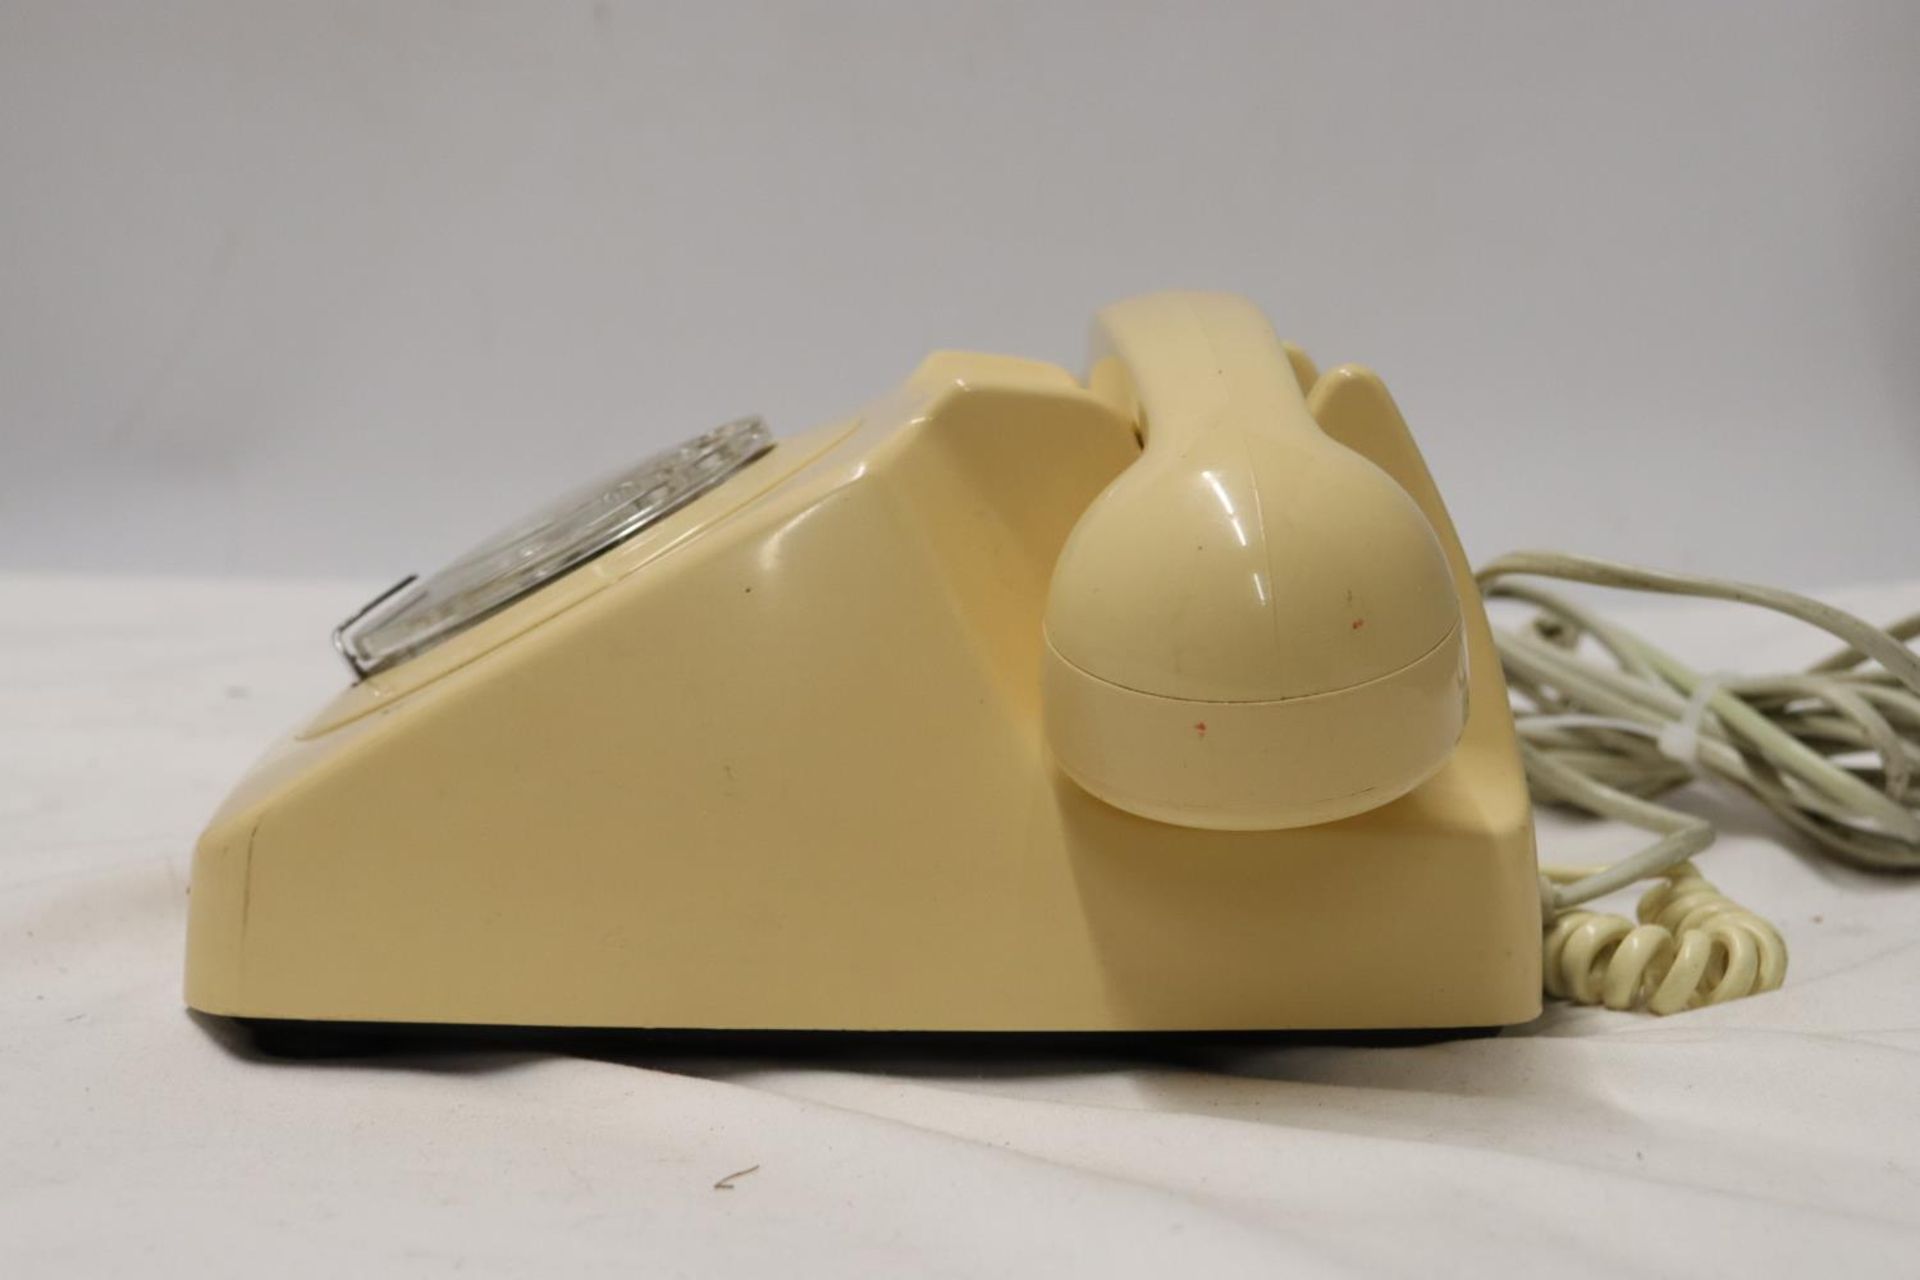 A VINTAGE GPO ROTARY DIAL PHONE - Image 3 of 4